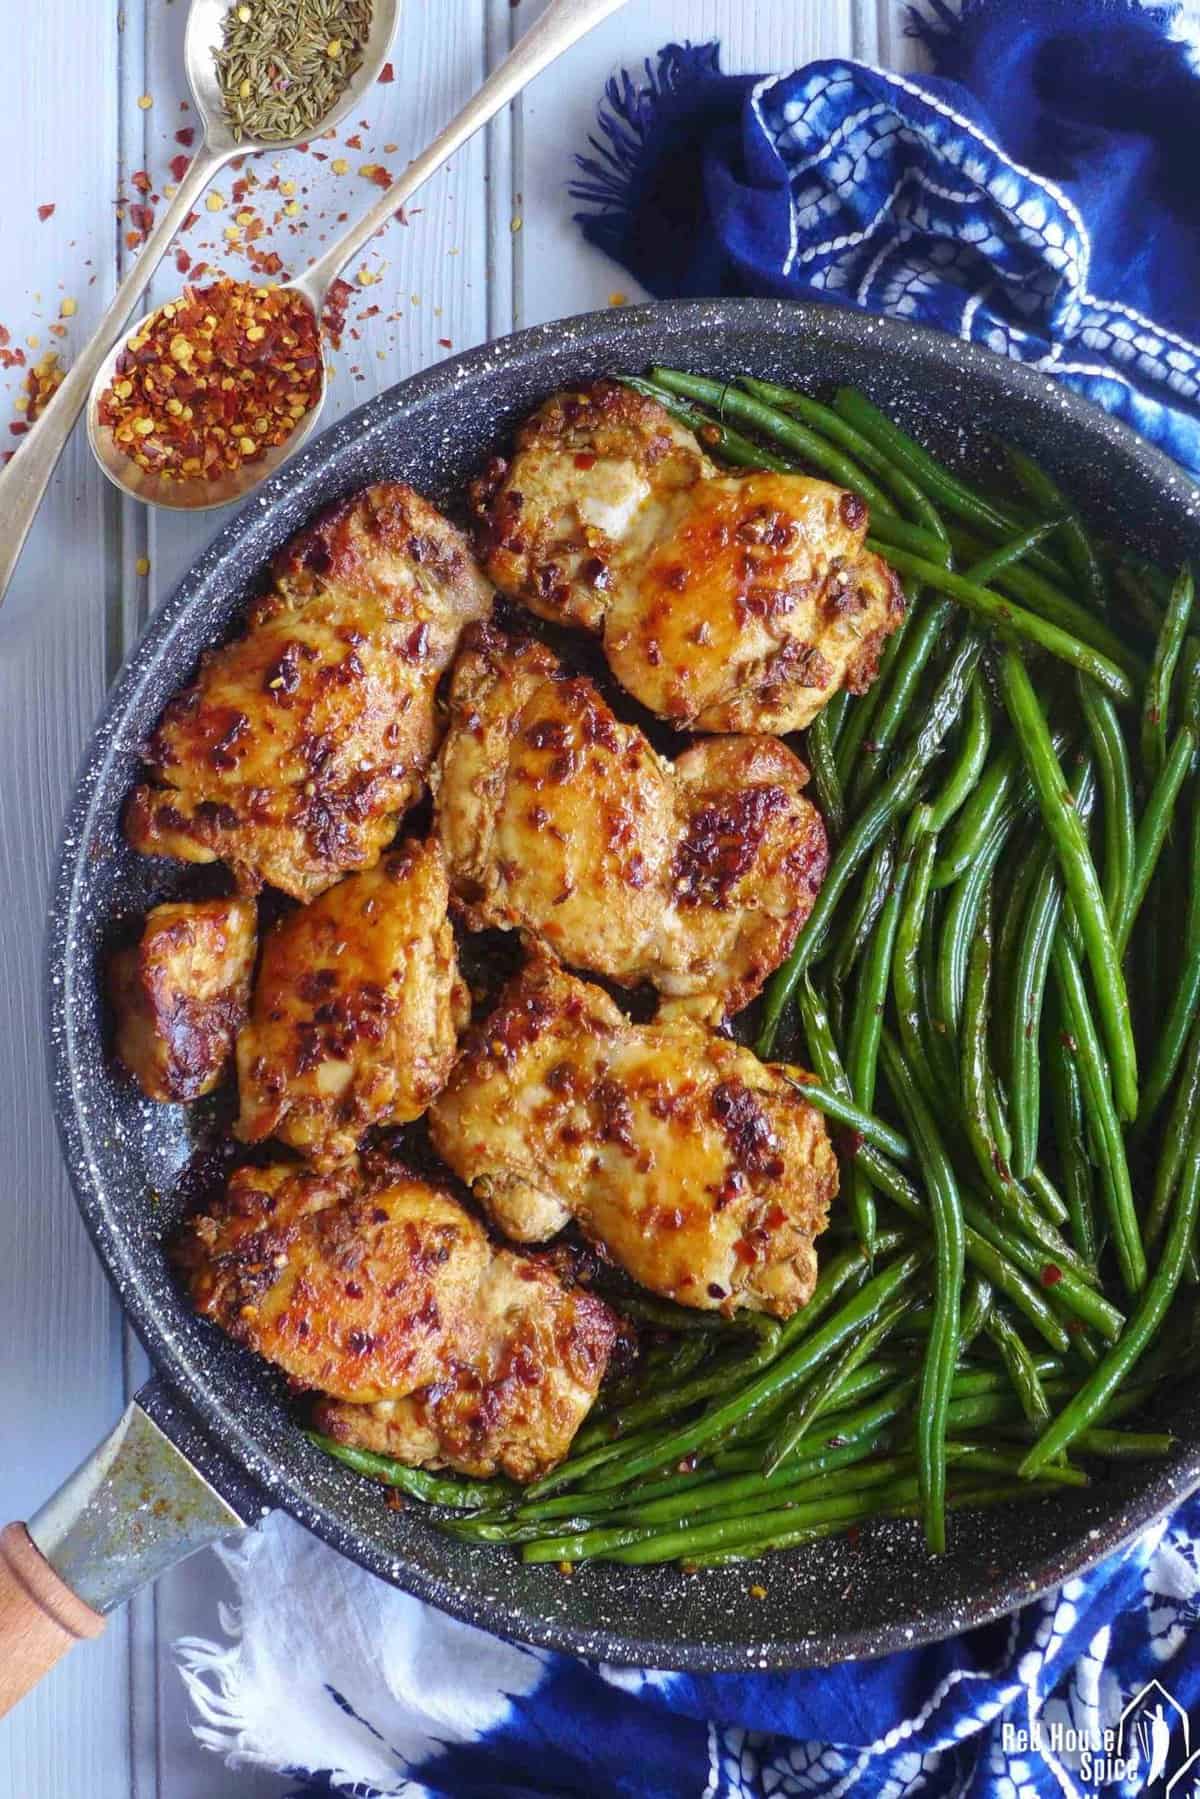 chili cumin chicken thighs and green beans in a skillet.